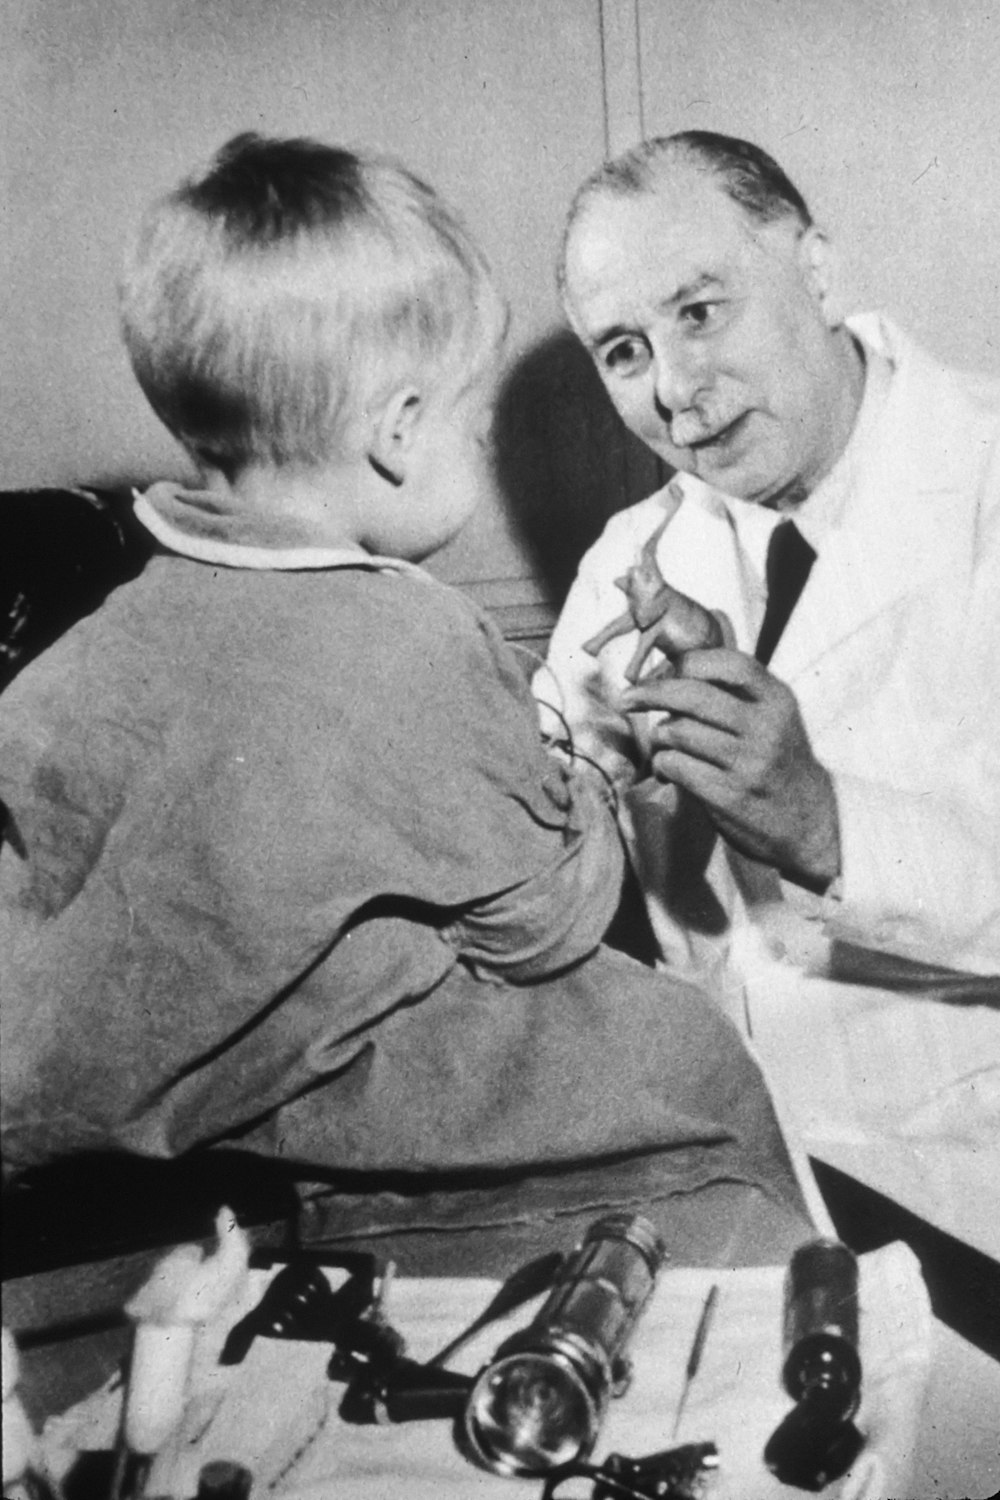 boy in white dress shirt holding a boy in black and white suit